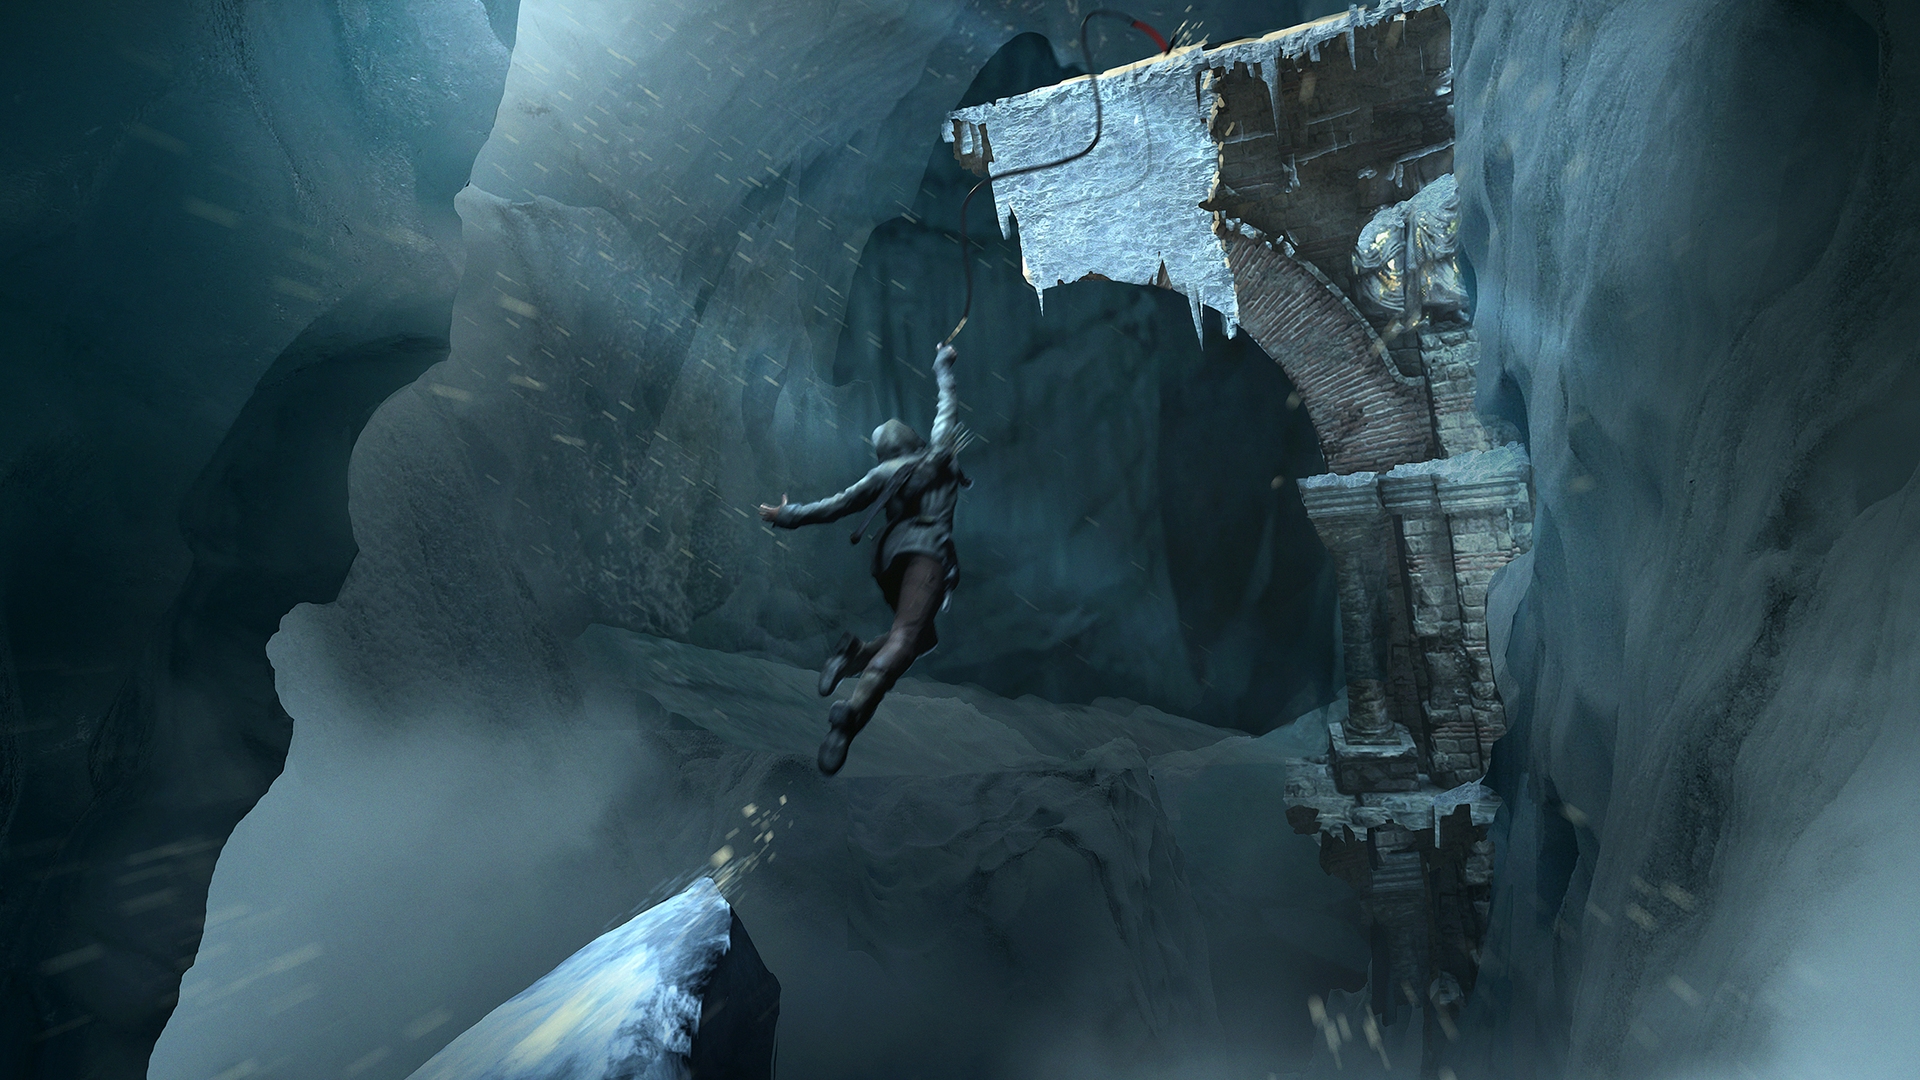 Lara Croft Rise of The Tomb Raider In Game for 1920 x 1080 HDTV 1080p resolution